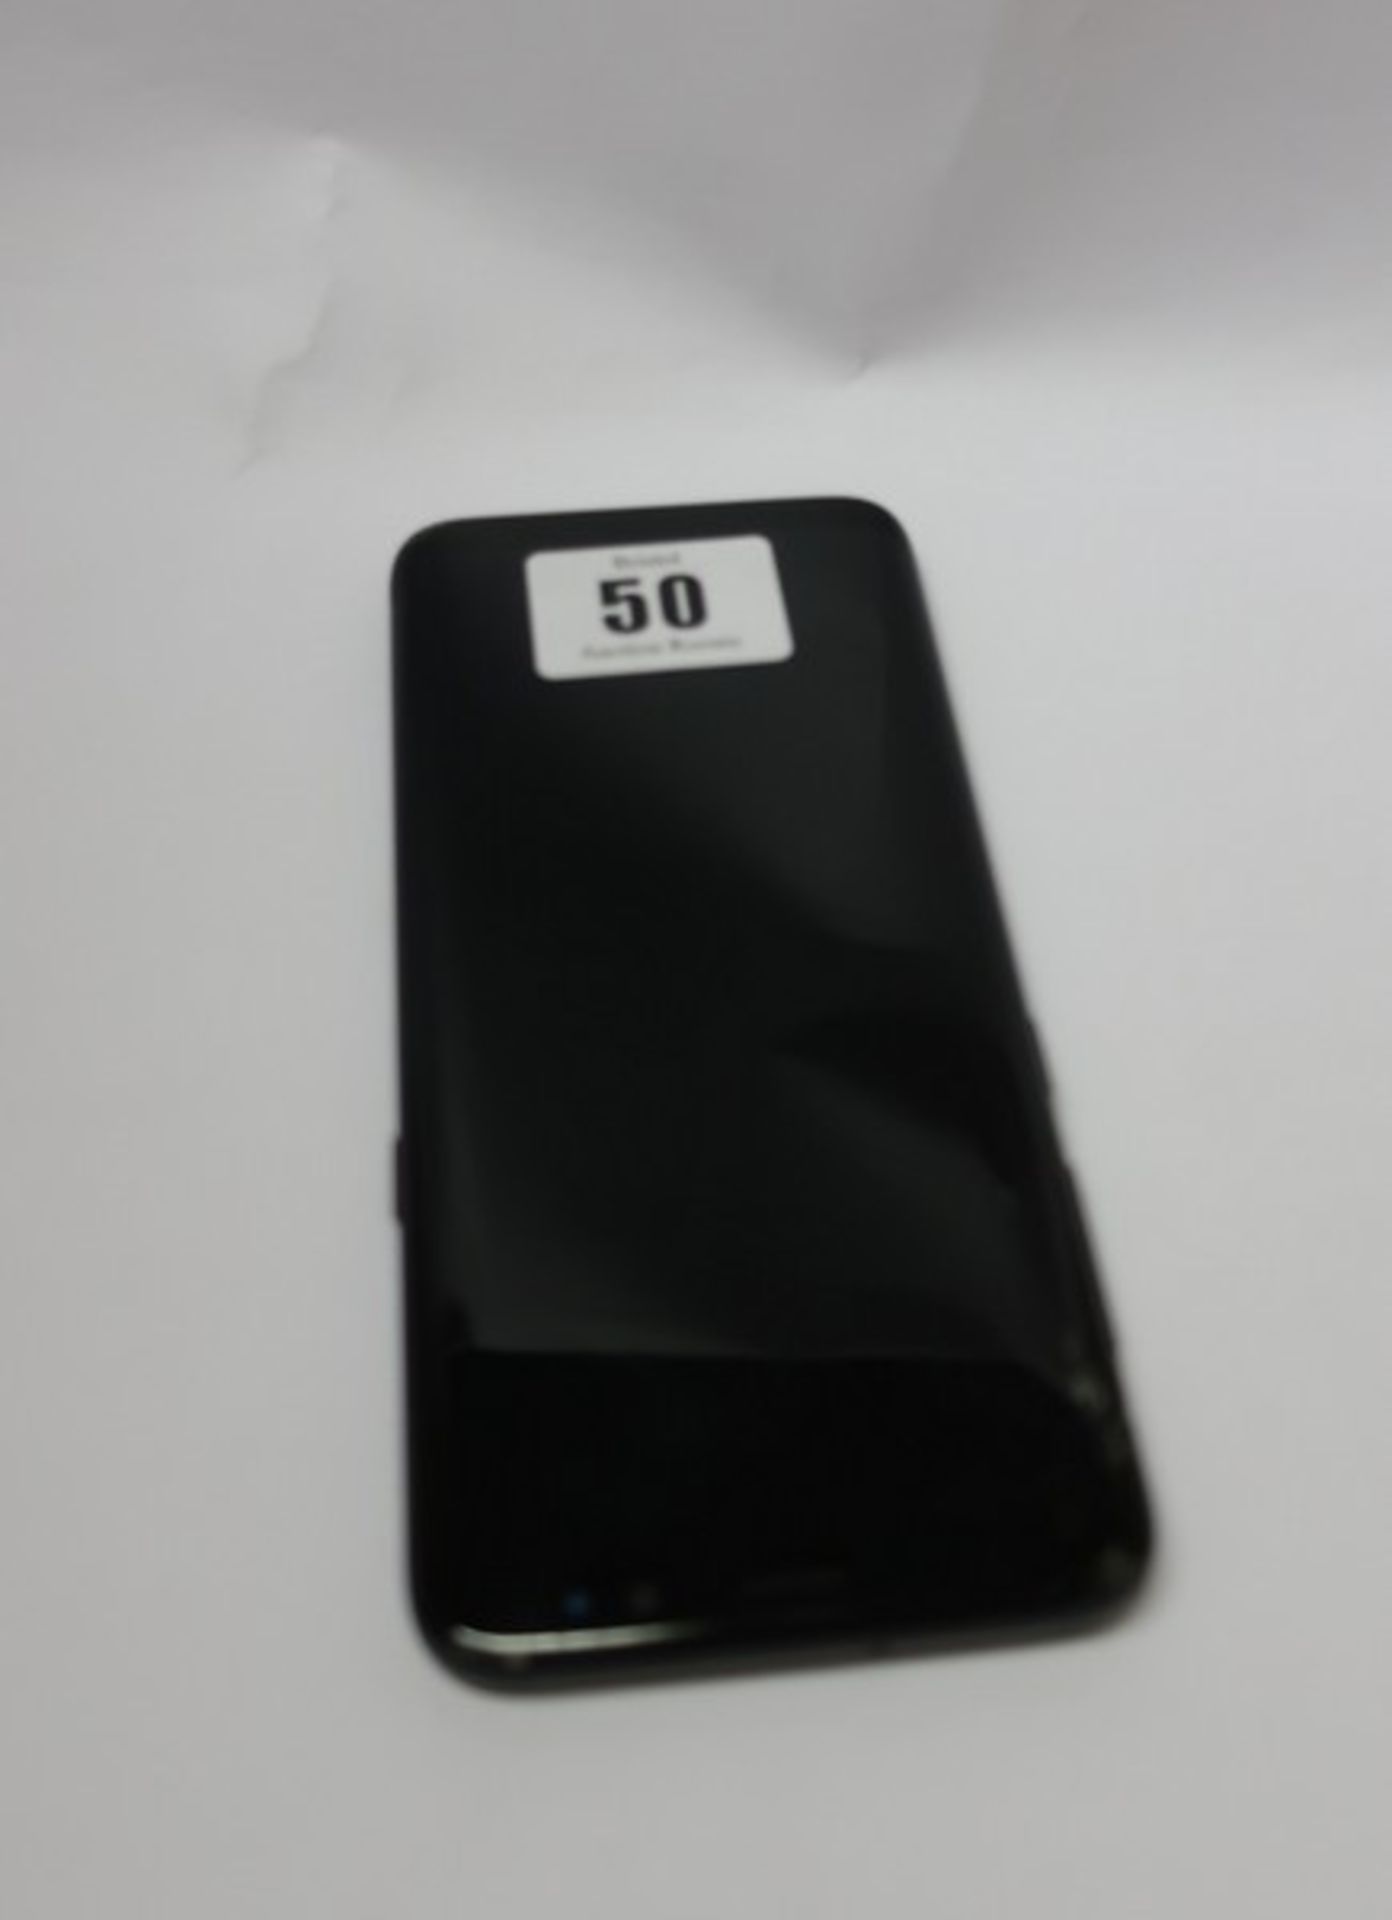 A Samsung Galaxy S8 SM-G950F 64GB (IMEI: 359038080725093) (FRP clear, damaged screen and back